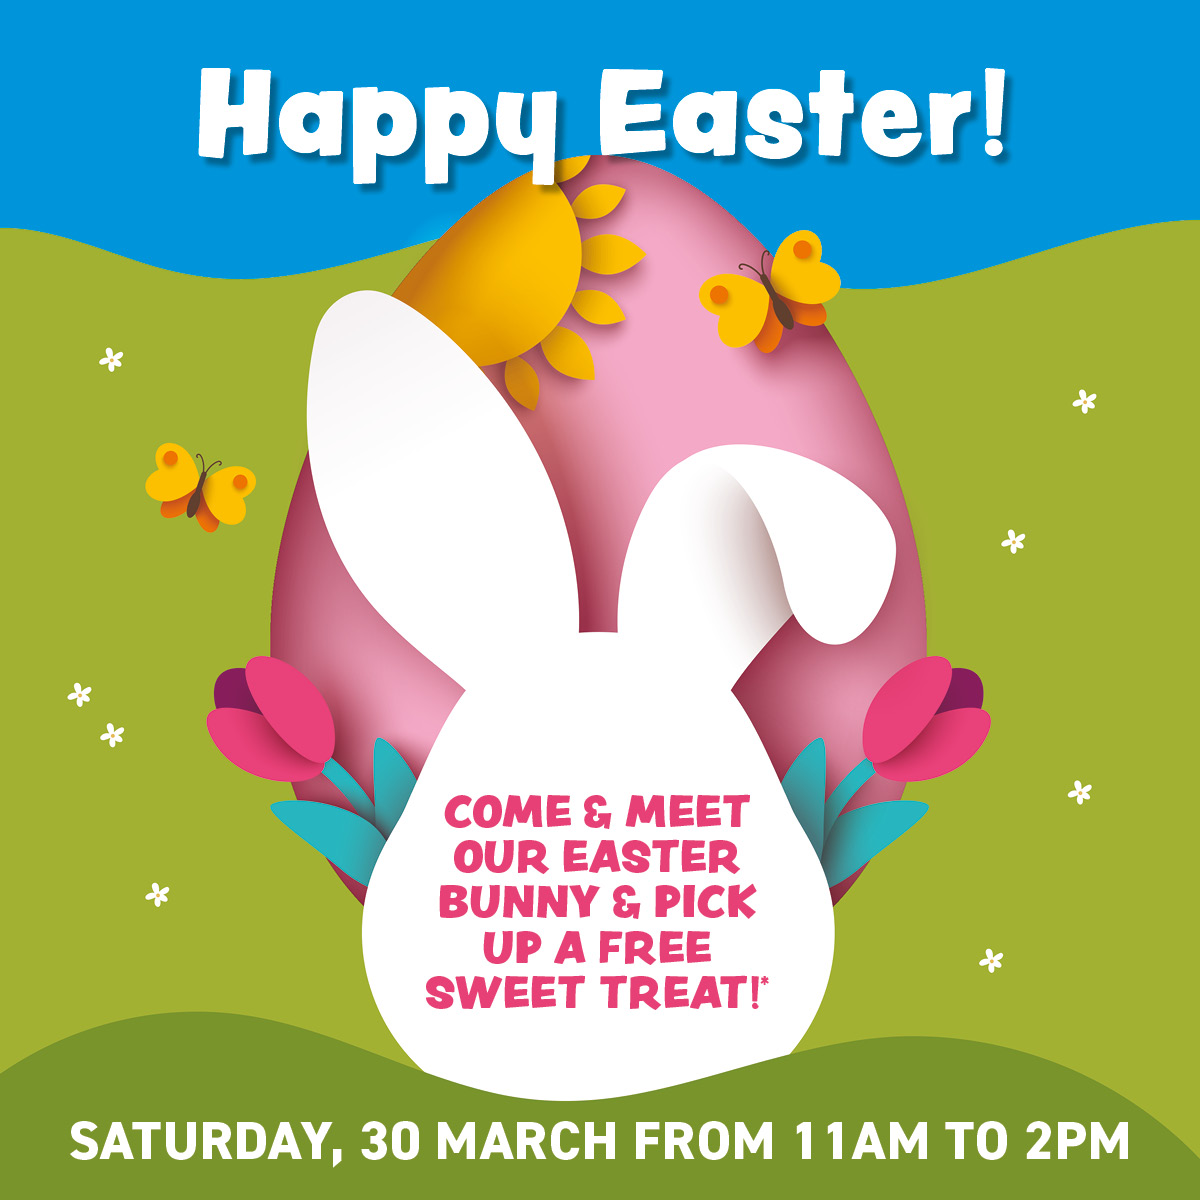 Come and meet our Easter Bunny on Saturday and pick up a free Easter sweet treat! He'll be hopping in to Queens Square between 11am and 2pm.